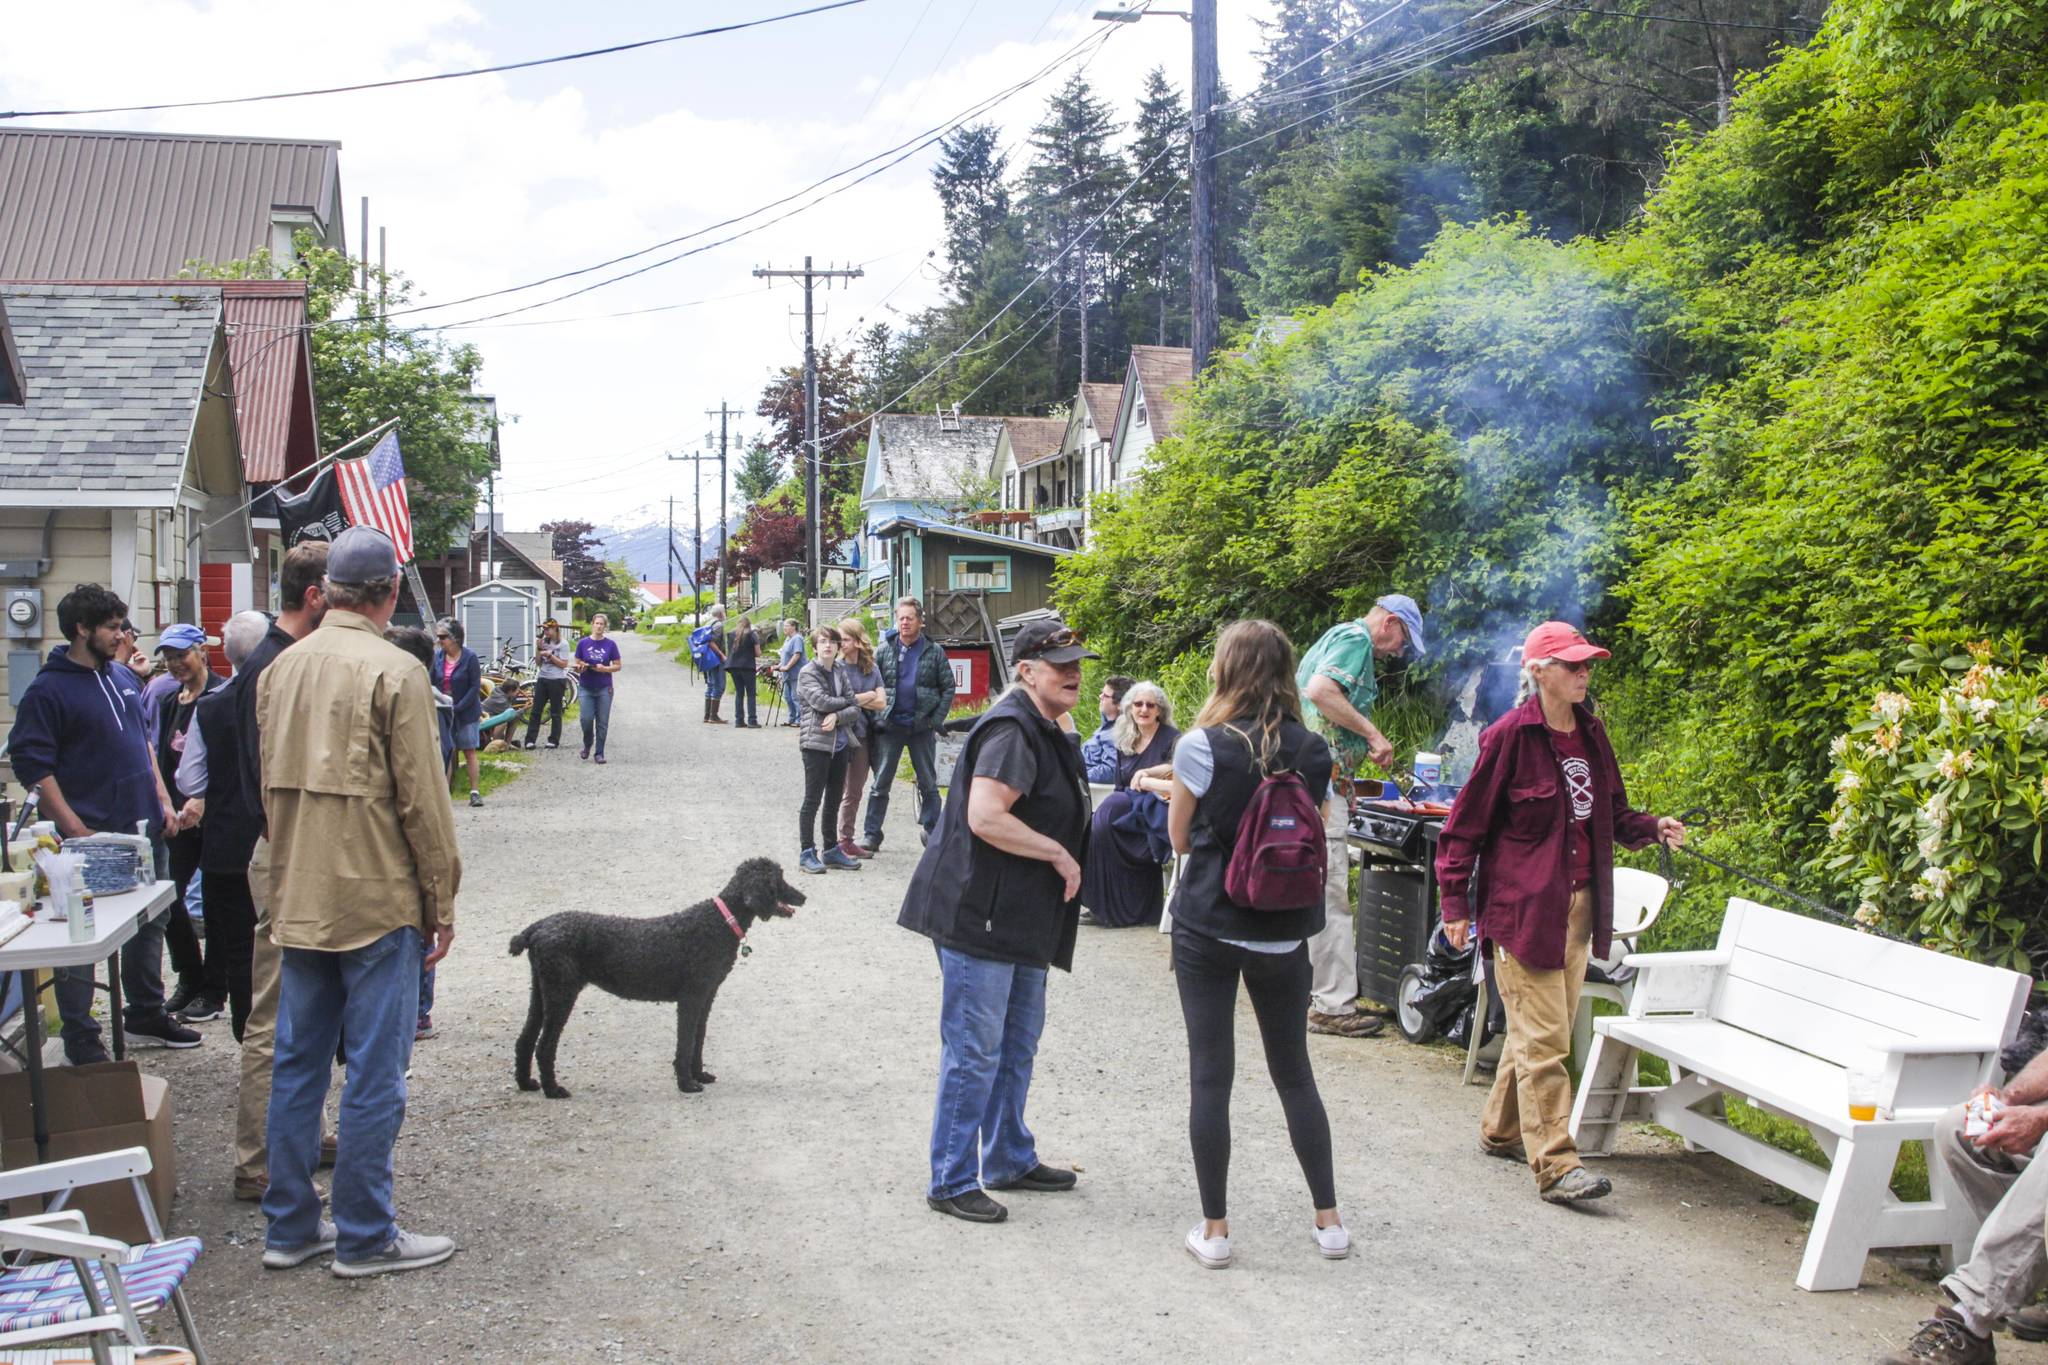 Alaska Seaplanes held a cookout in Tenakee Springs on June 9, 2021, to celebrate the debut of a new seaplane in their fleet in one of the communities that aircraft will serve. (Michael S. Lockett / Juneau Empire)